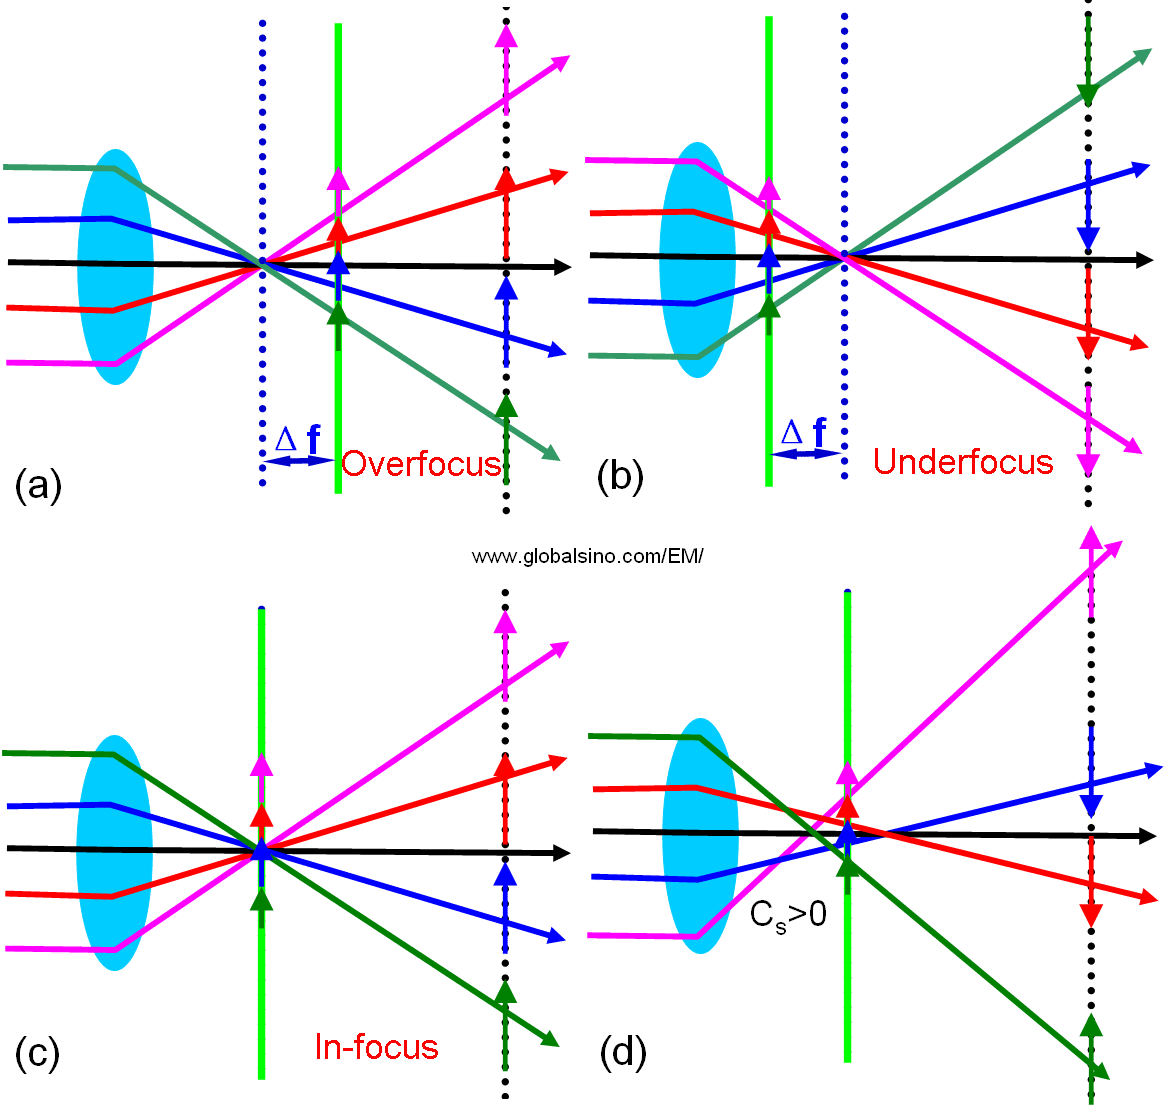 Schematic illustration of the formation of Ronchigram shadow images for different defocus conditions